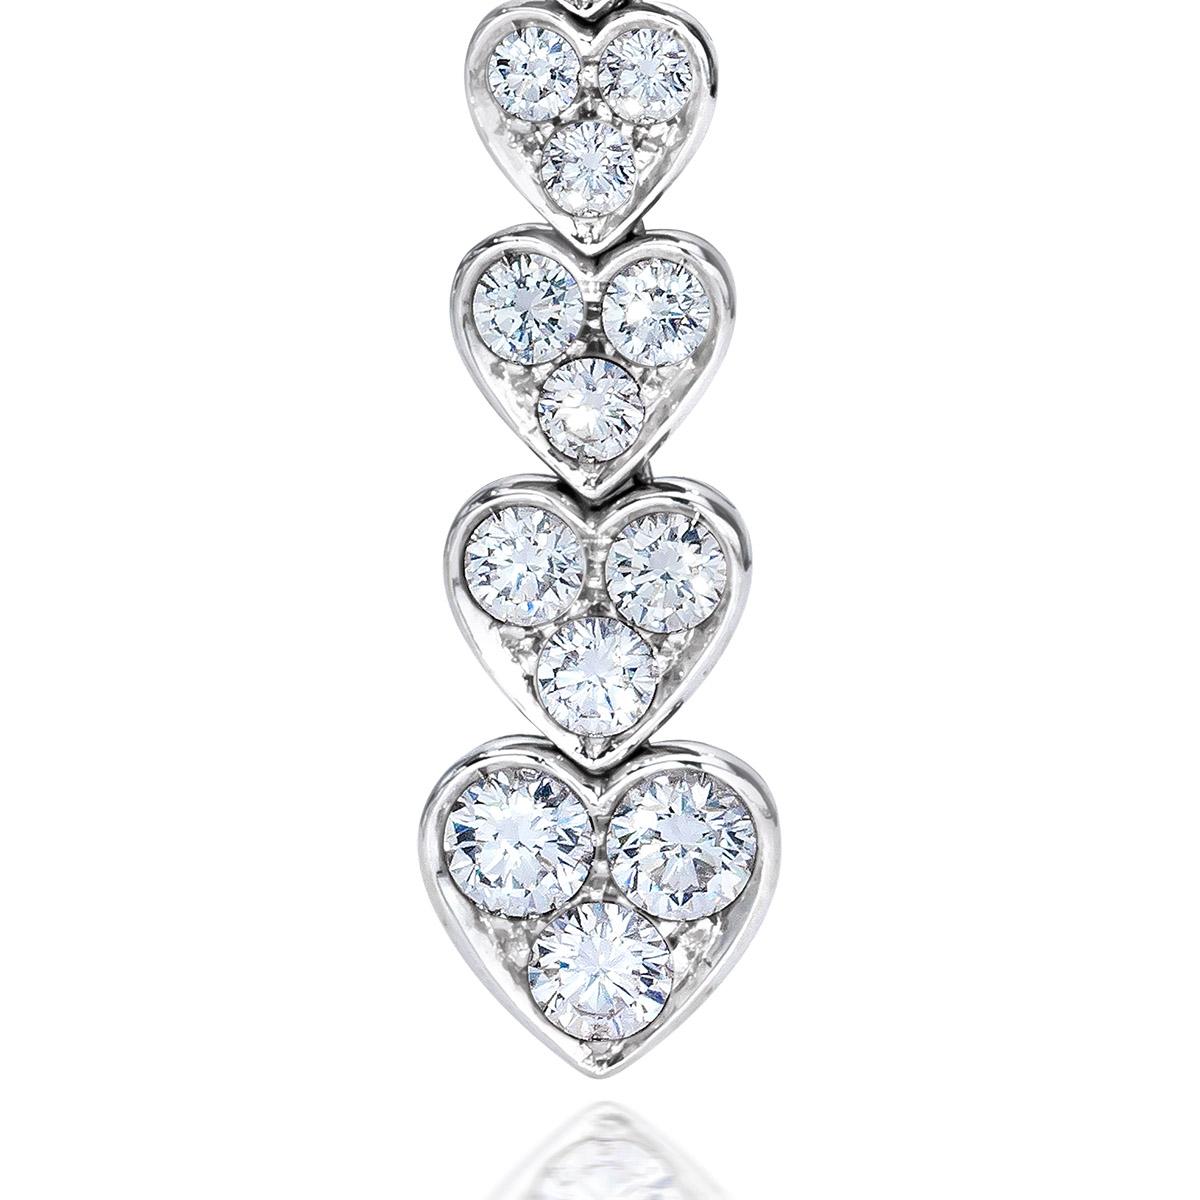 These gorgeous graduating diamond heart drops are handcrafted by the renowned Italian designer PIcchiotti. Set in 18kt white gold, these 3